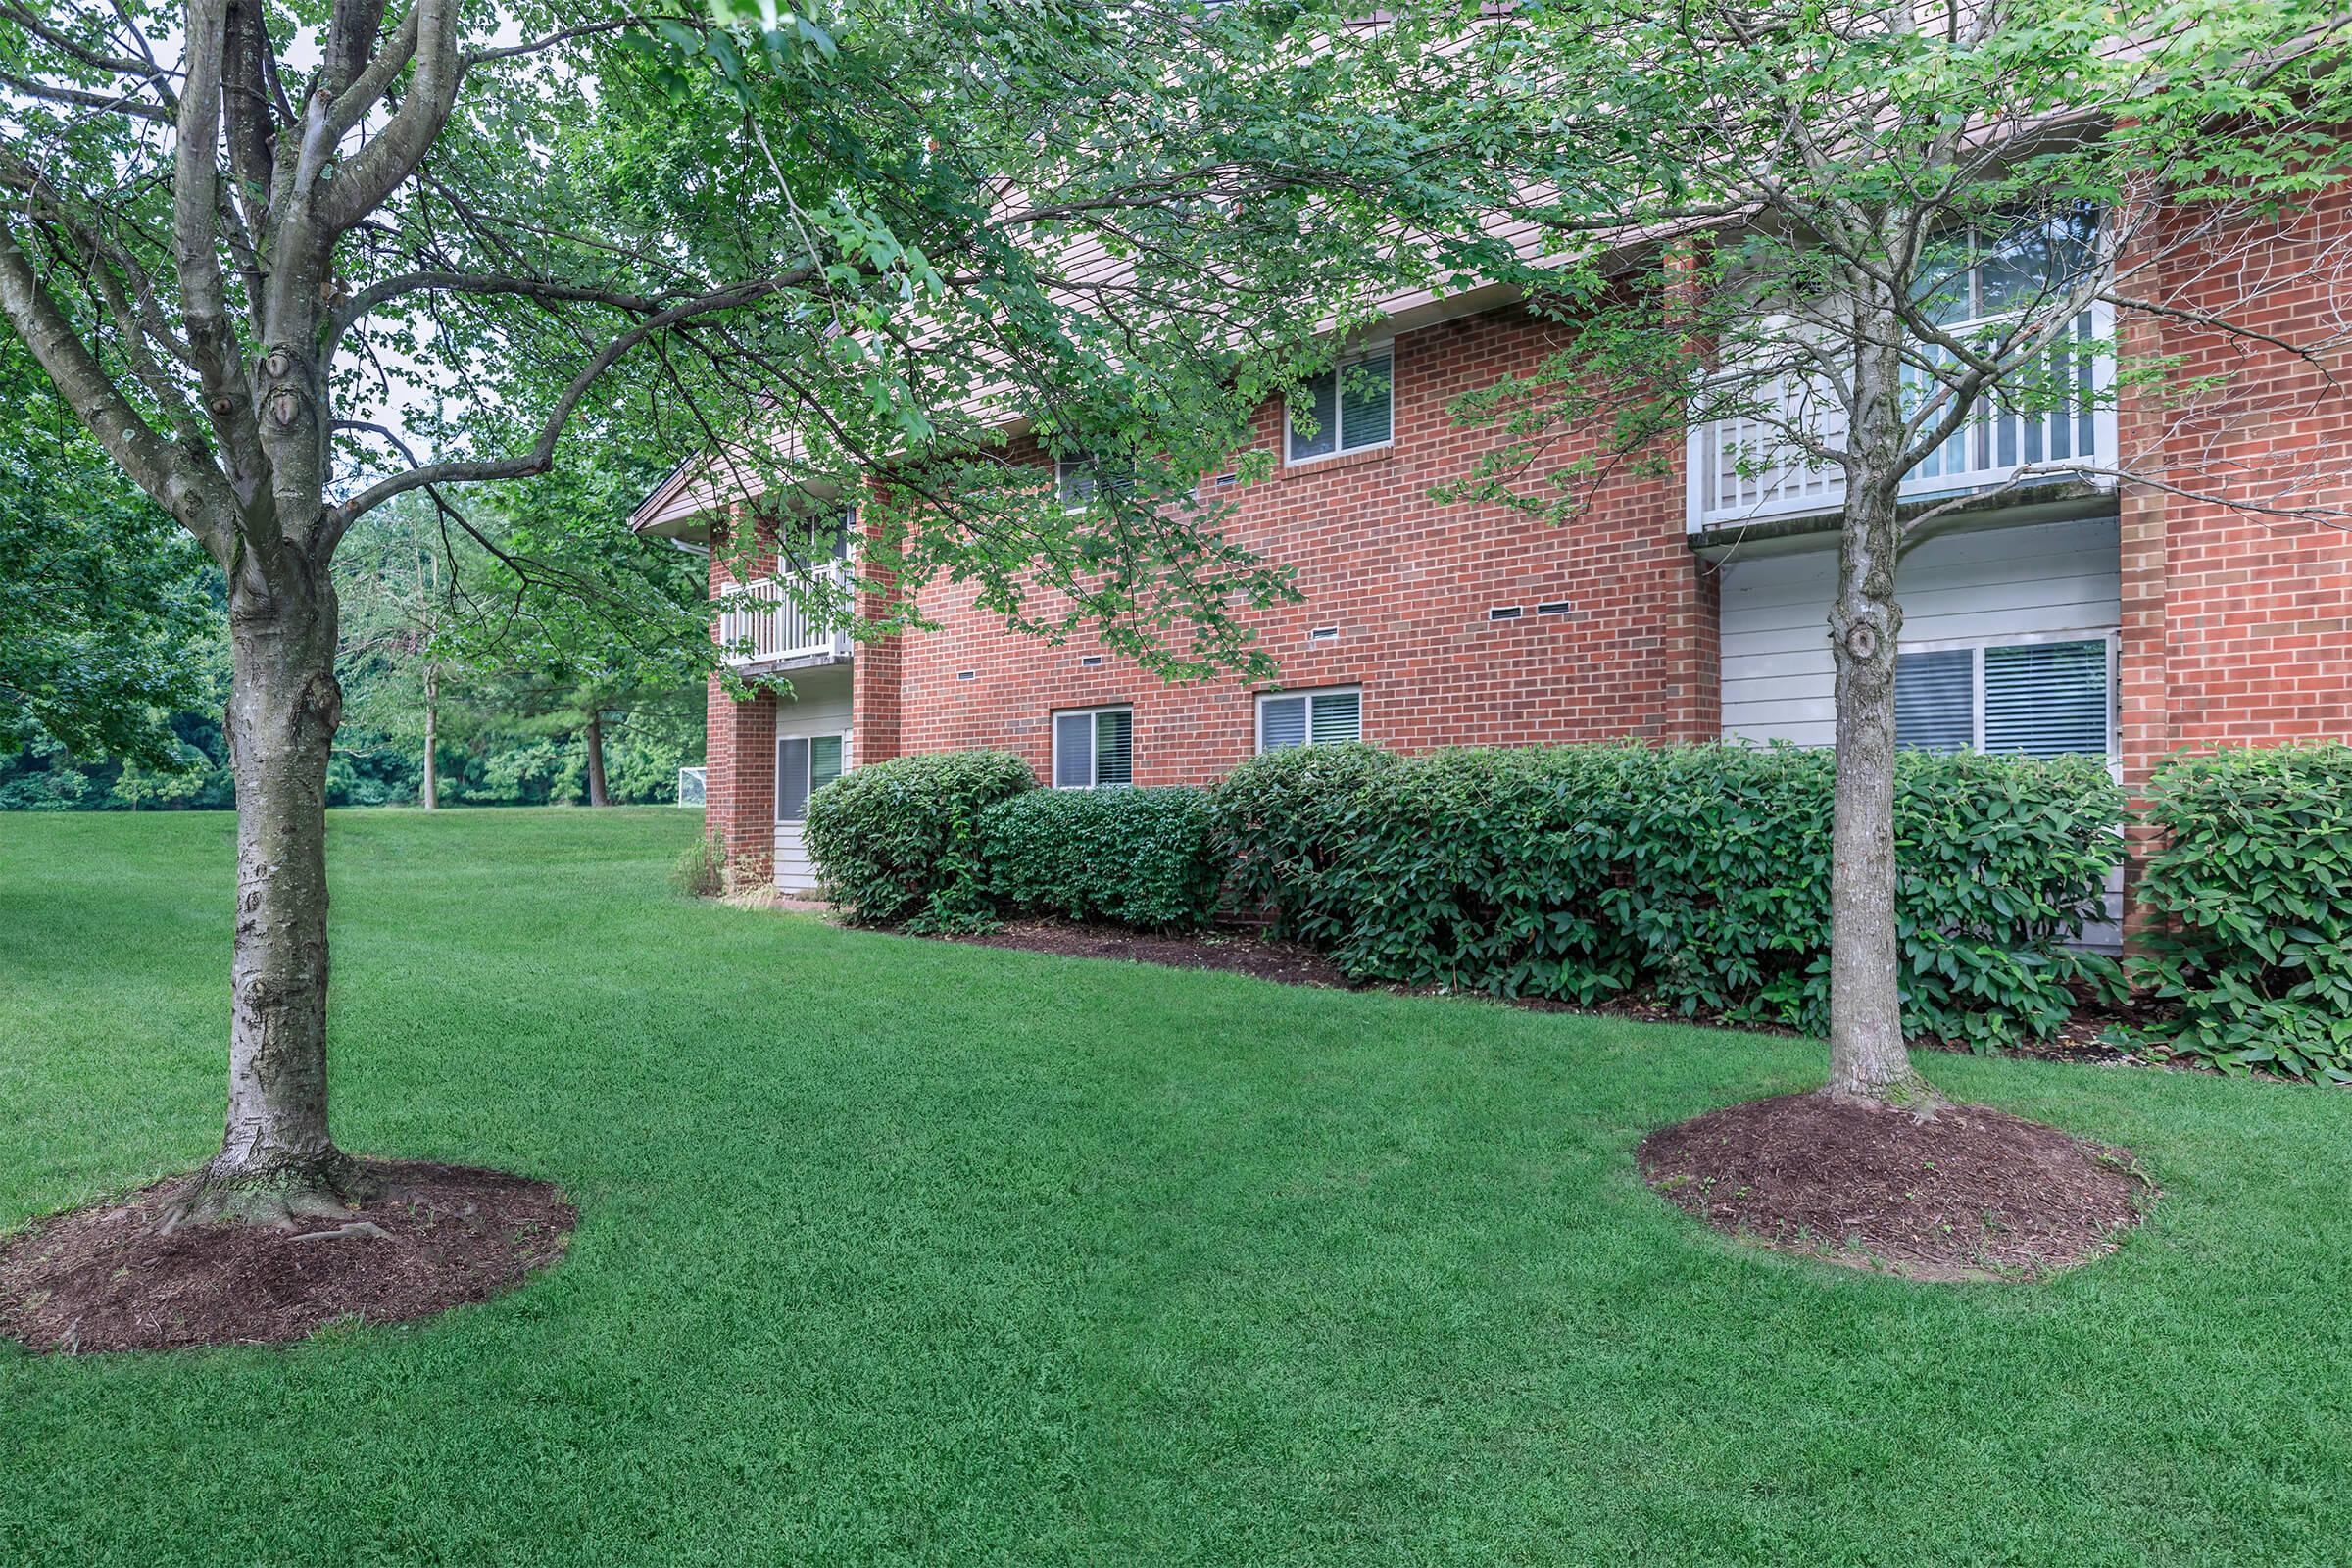 Landscaping at Huntington Square Apartments in Columbia, MD